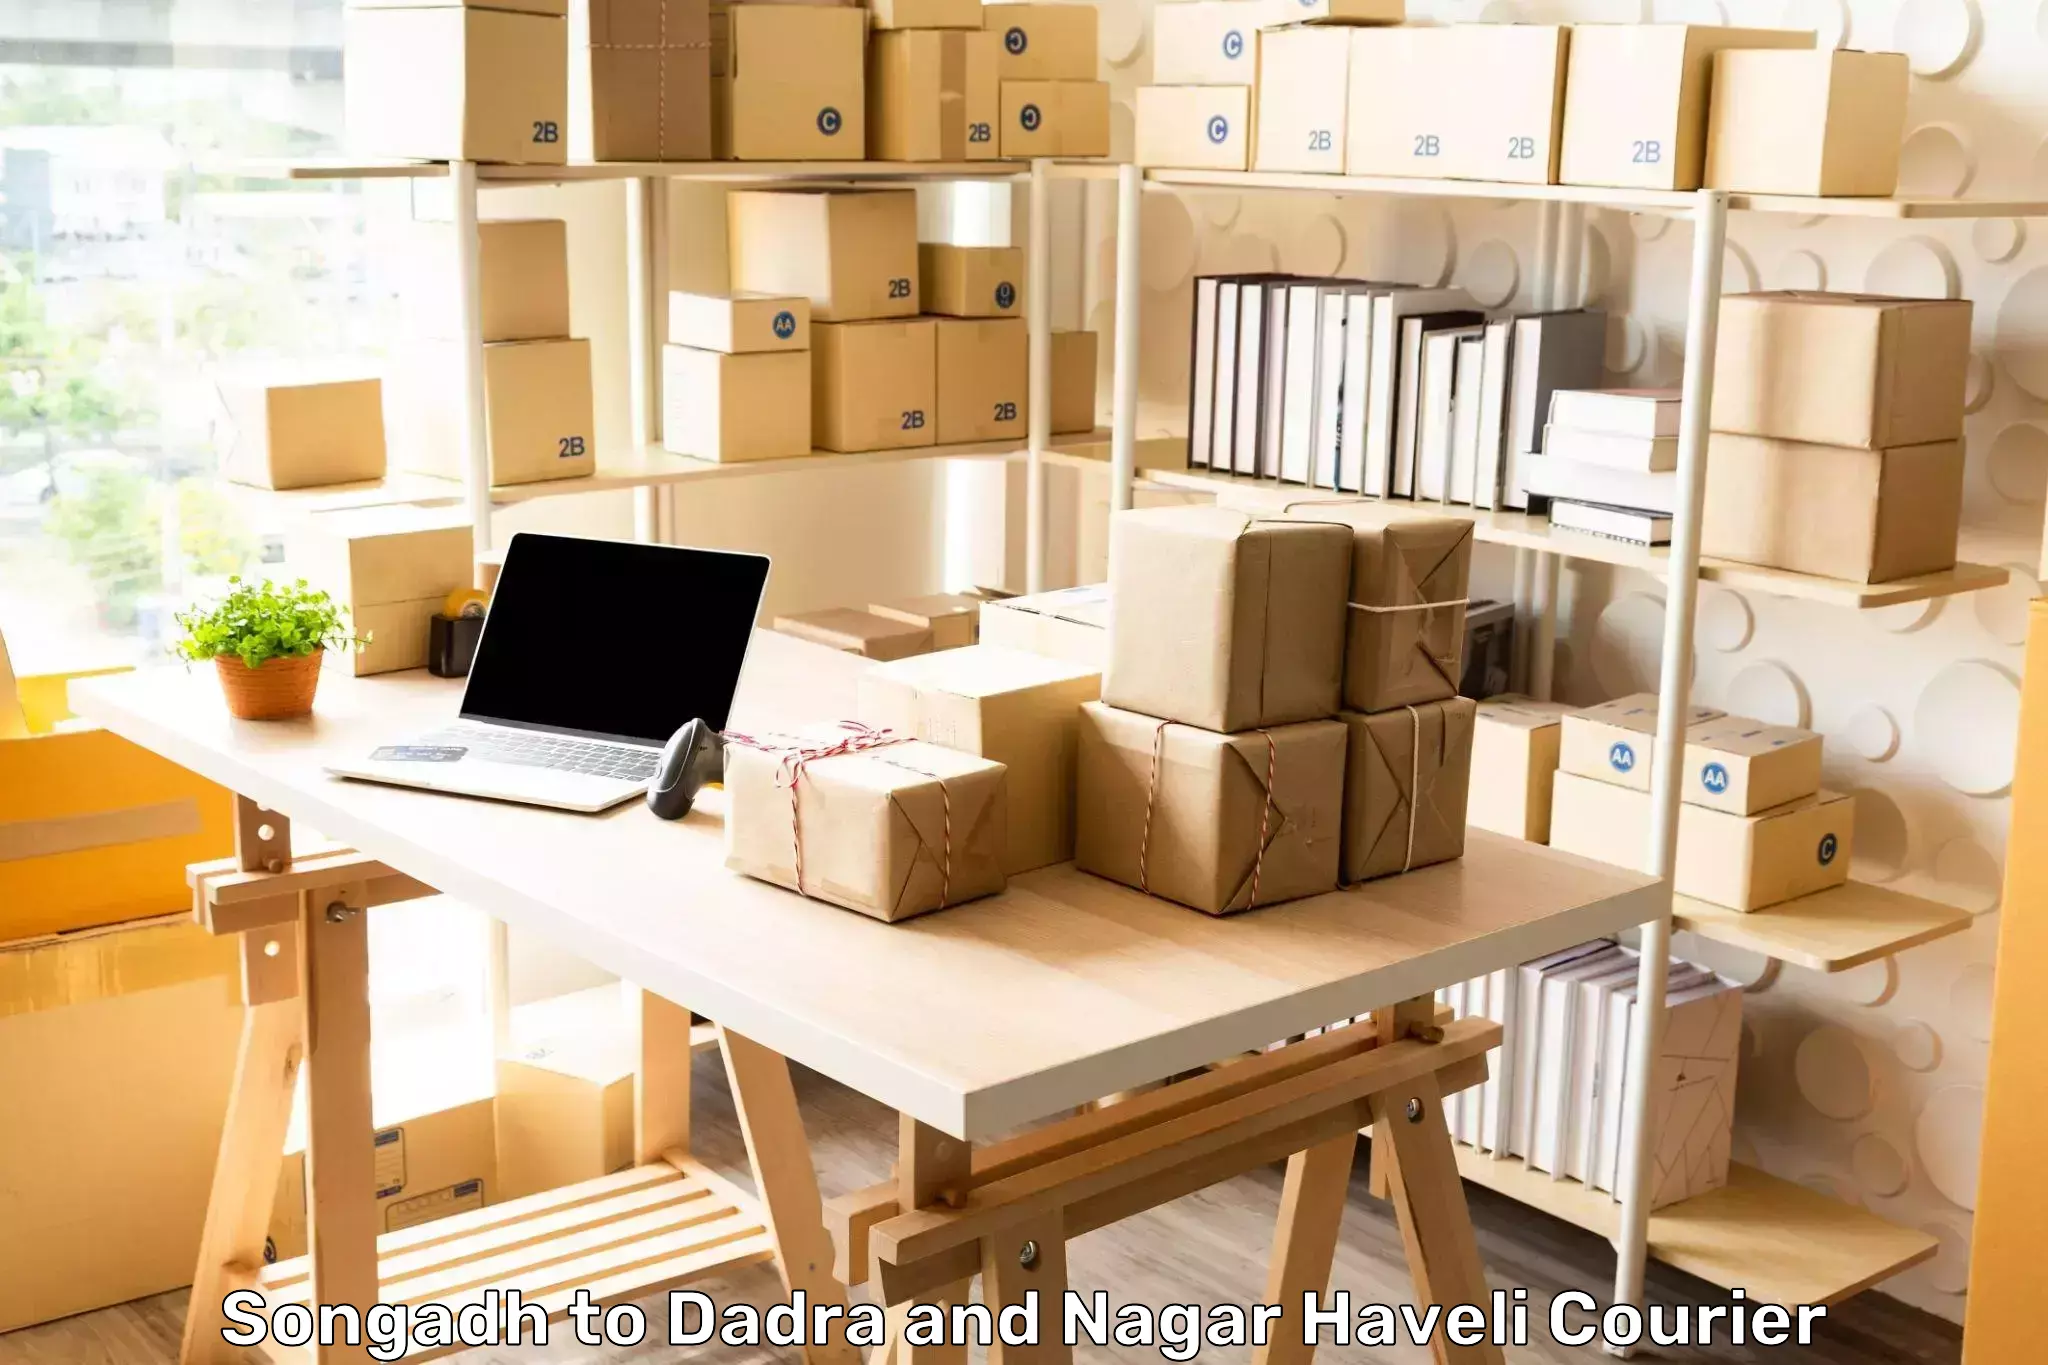 Retail shipping solutions Songadh to Dadra and Nagar Haveli